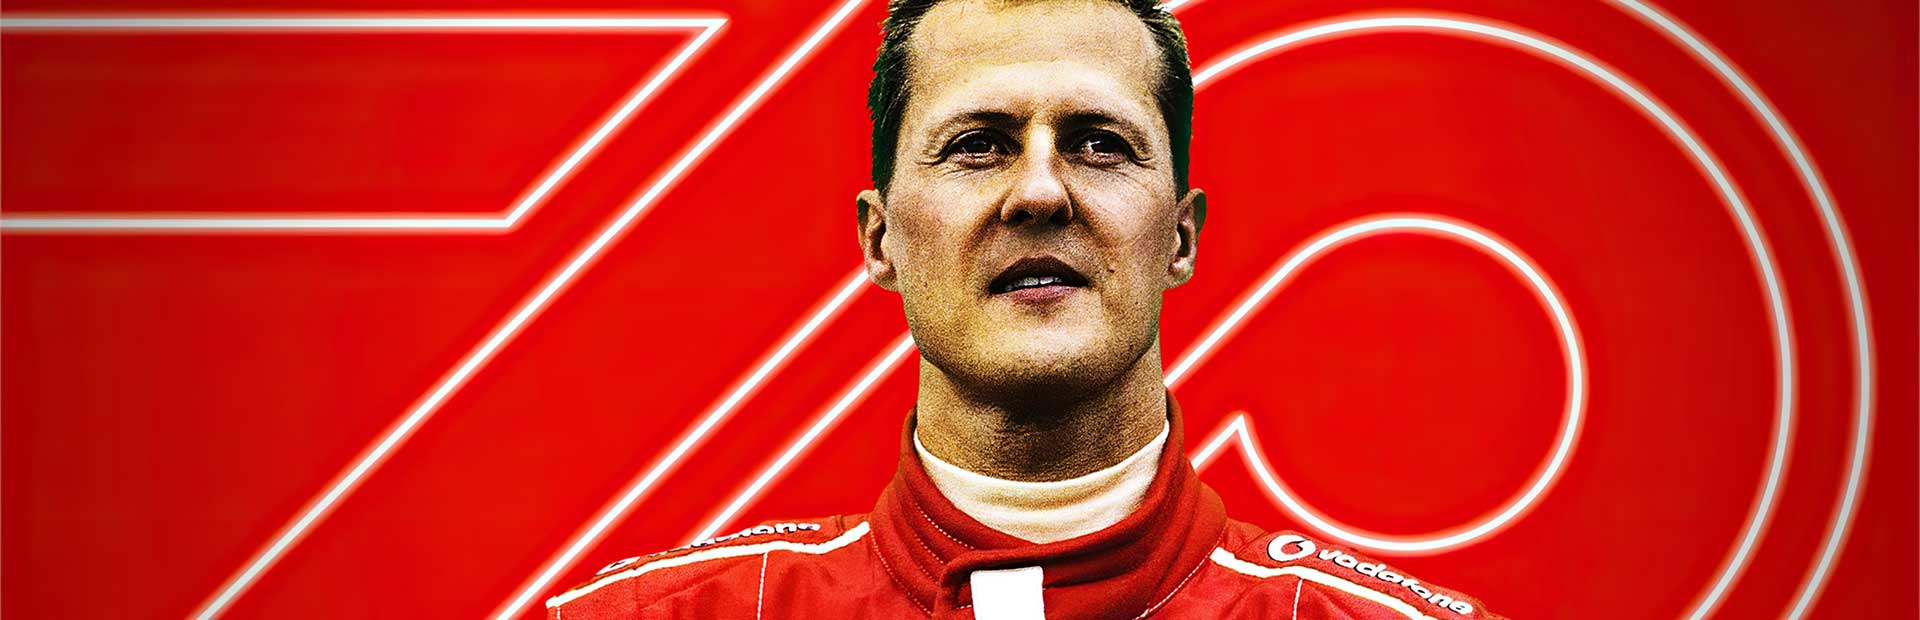 F1 2020 Deluxe Schumacher Edition for PC